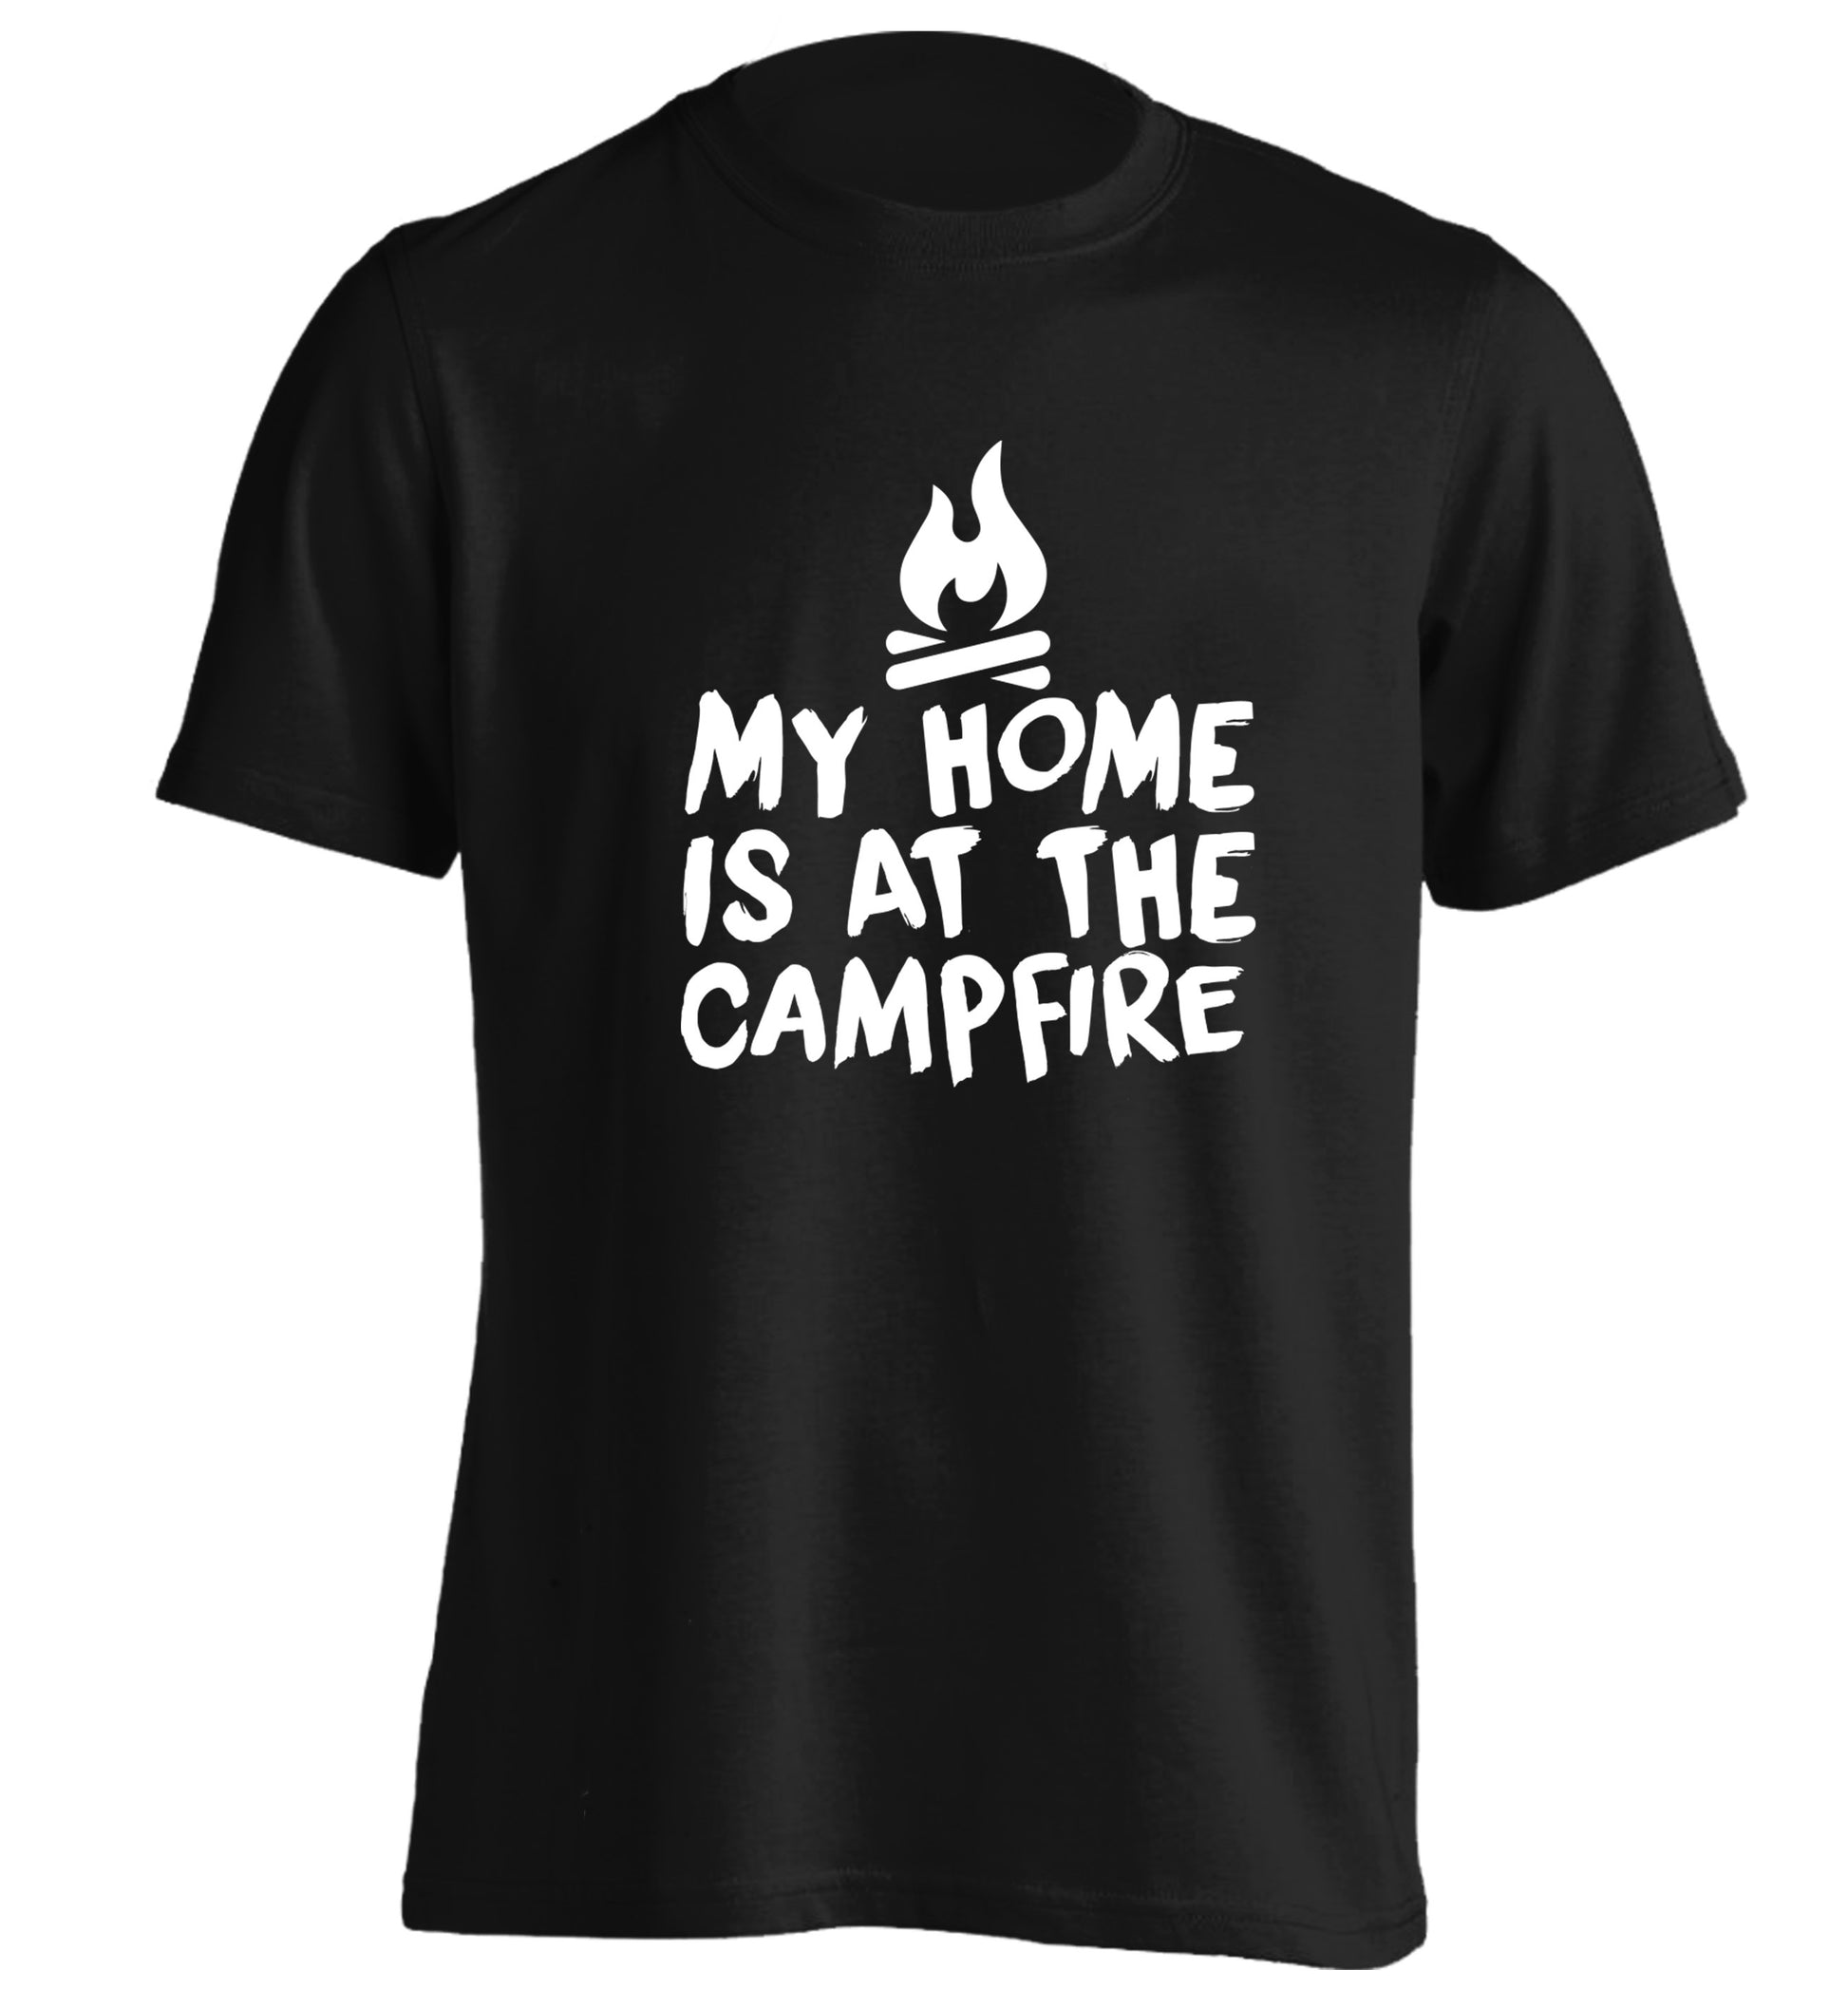 My home is at the campfire adults unisex black Tshirt 2XL